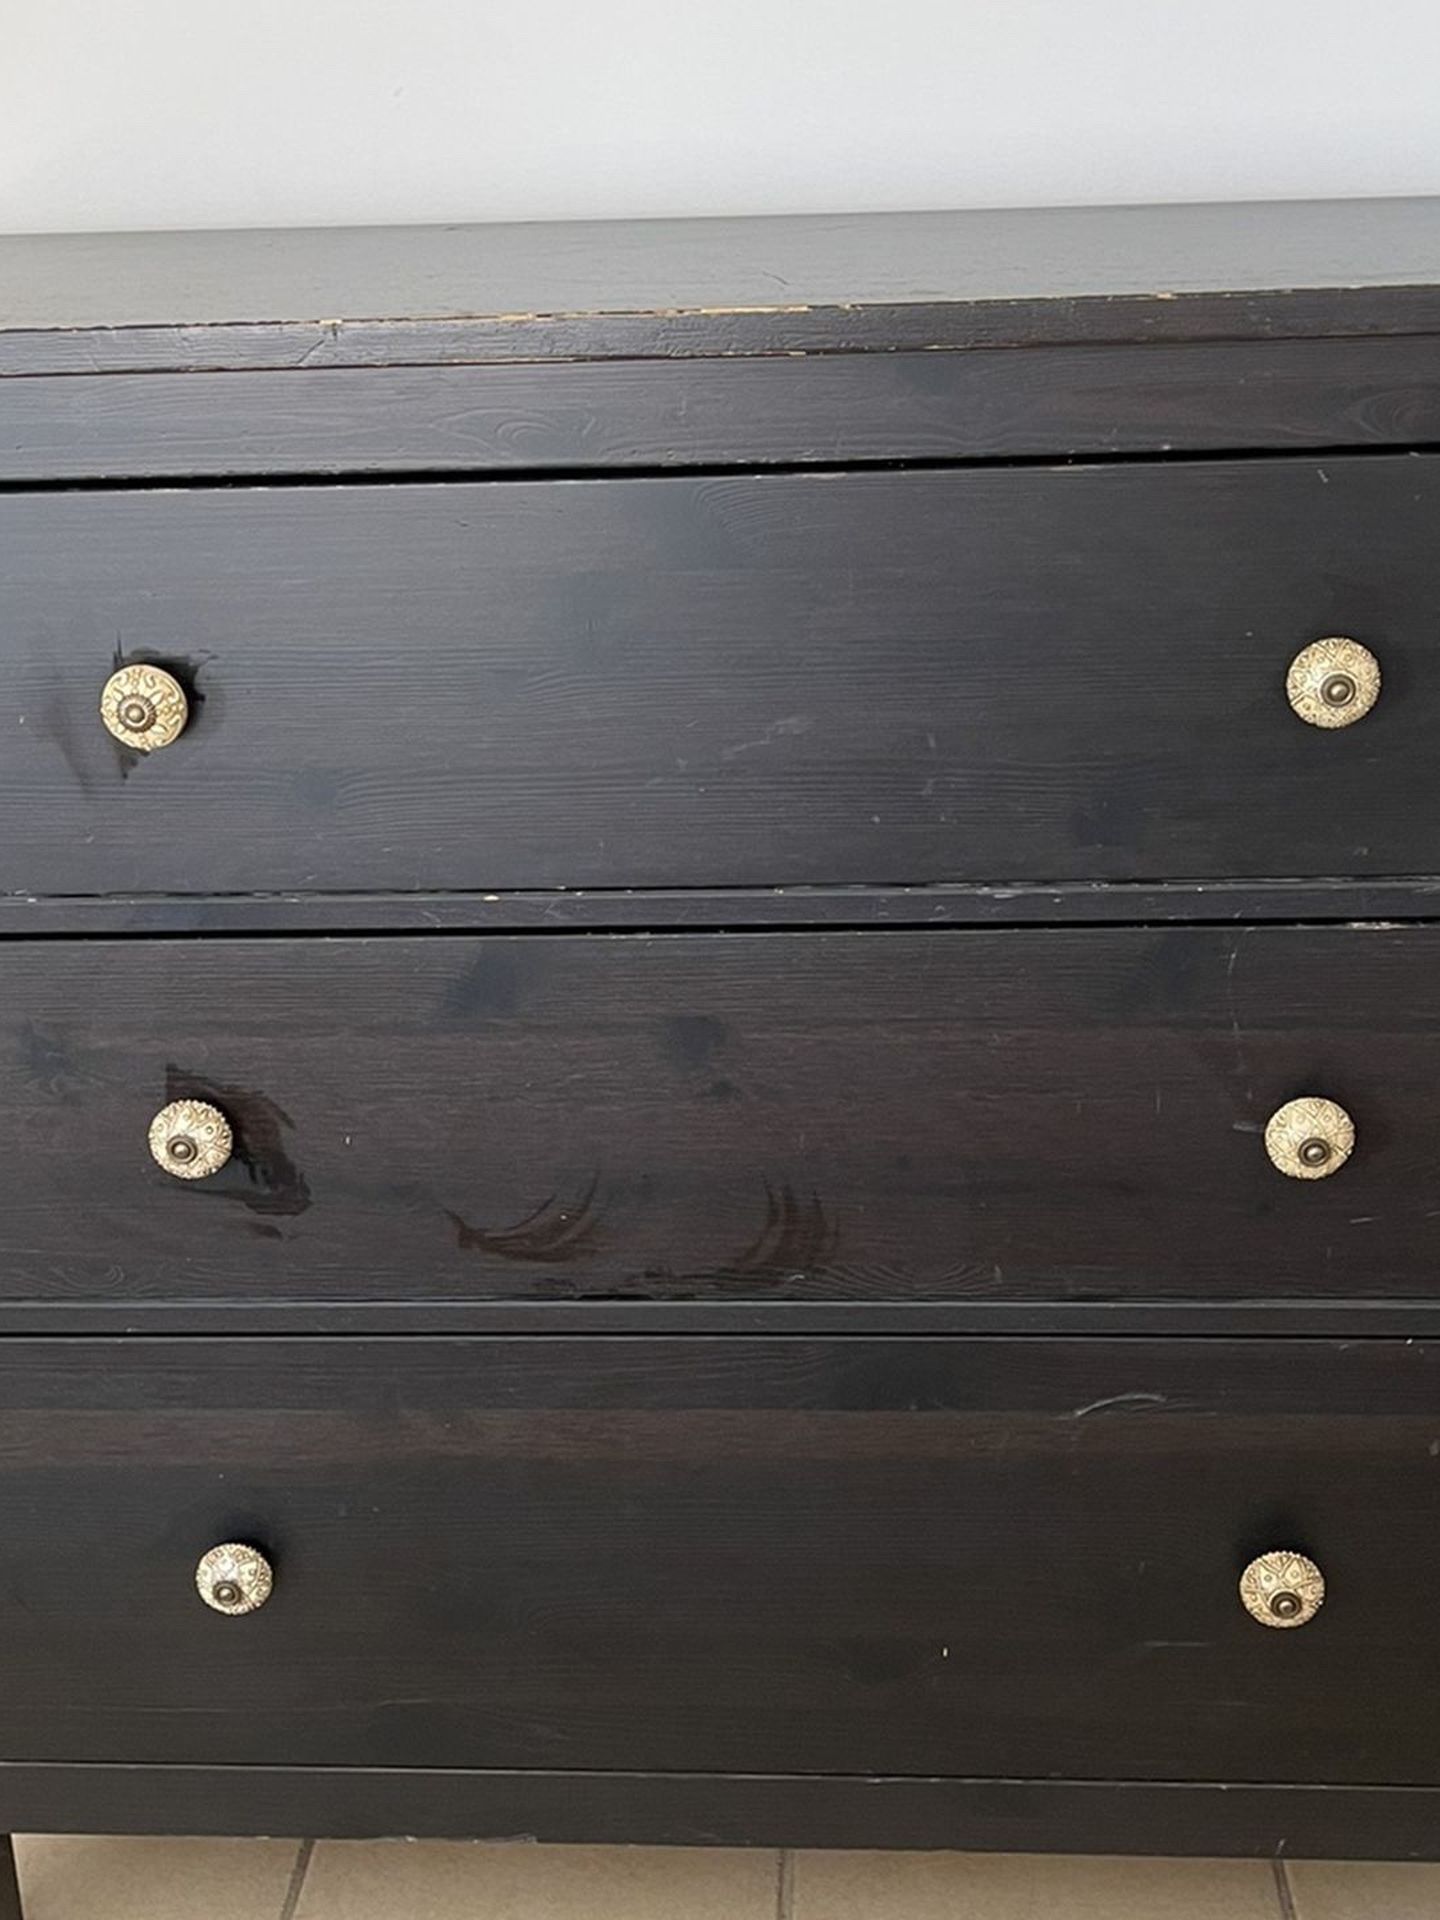 Refurbished Dresser - New Knobs - Lots Of Space In Drawers